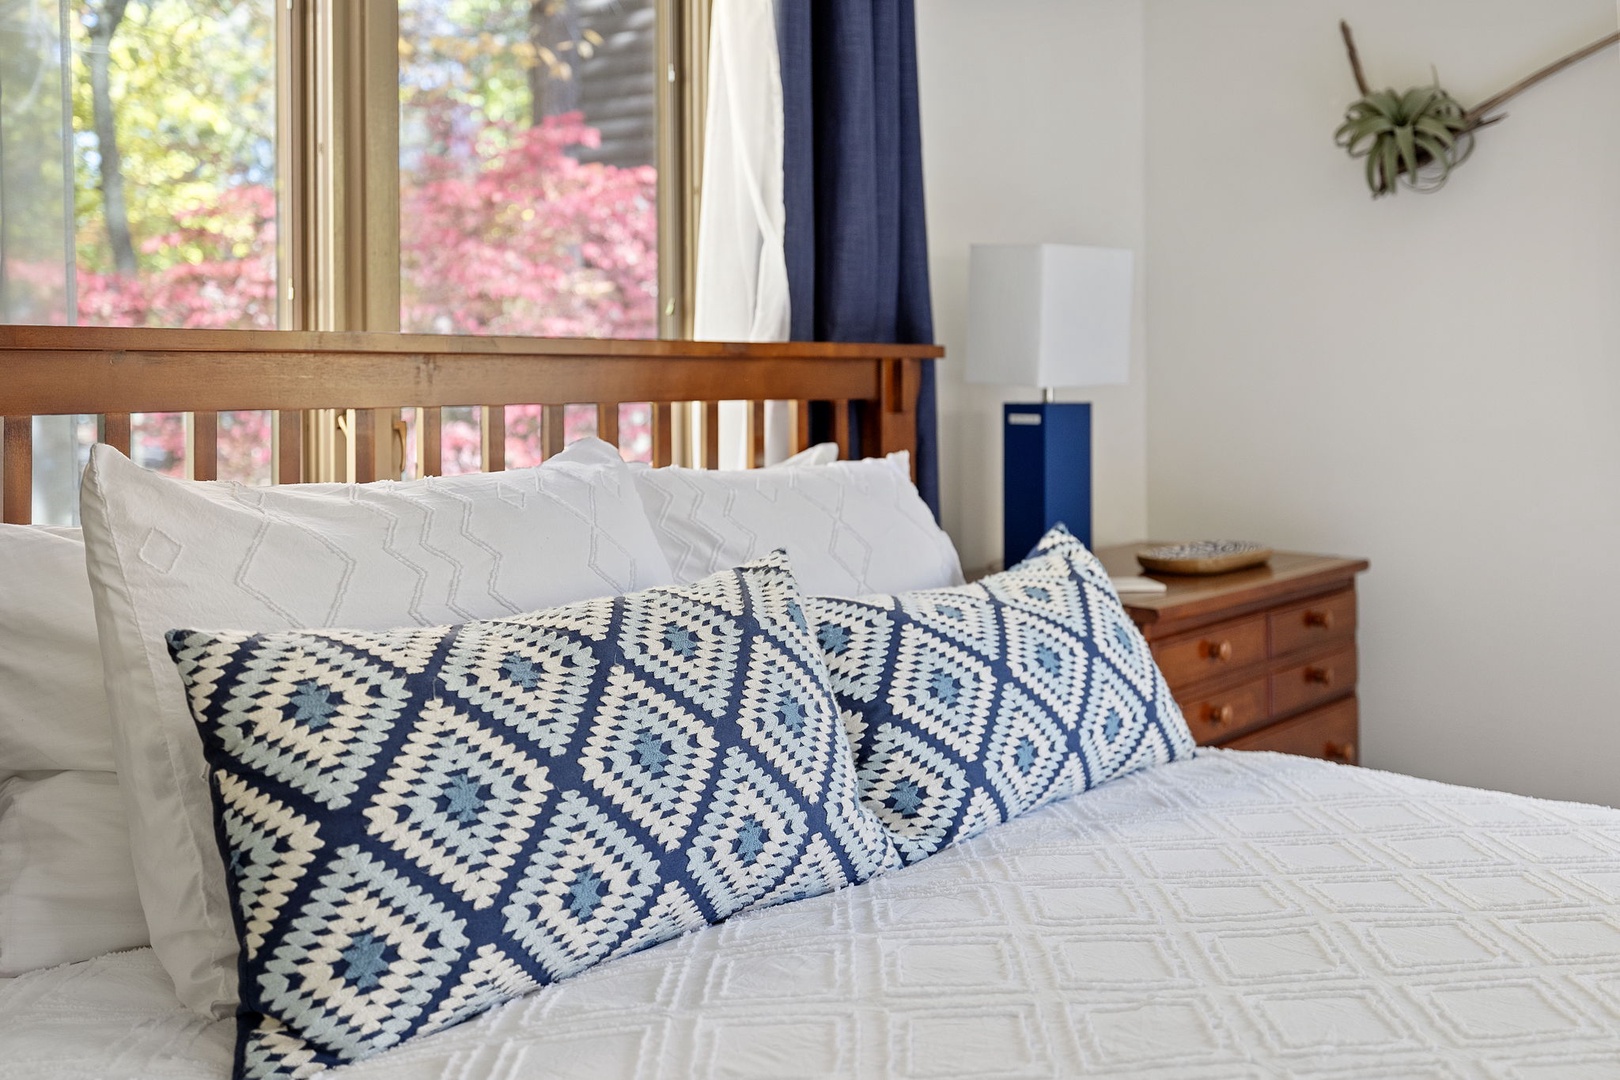 High-quality bedding and linens can be found in every bedroom… Just sayin’.